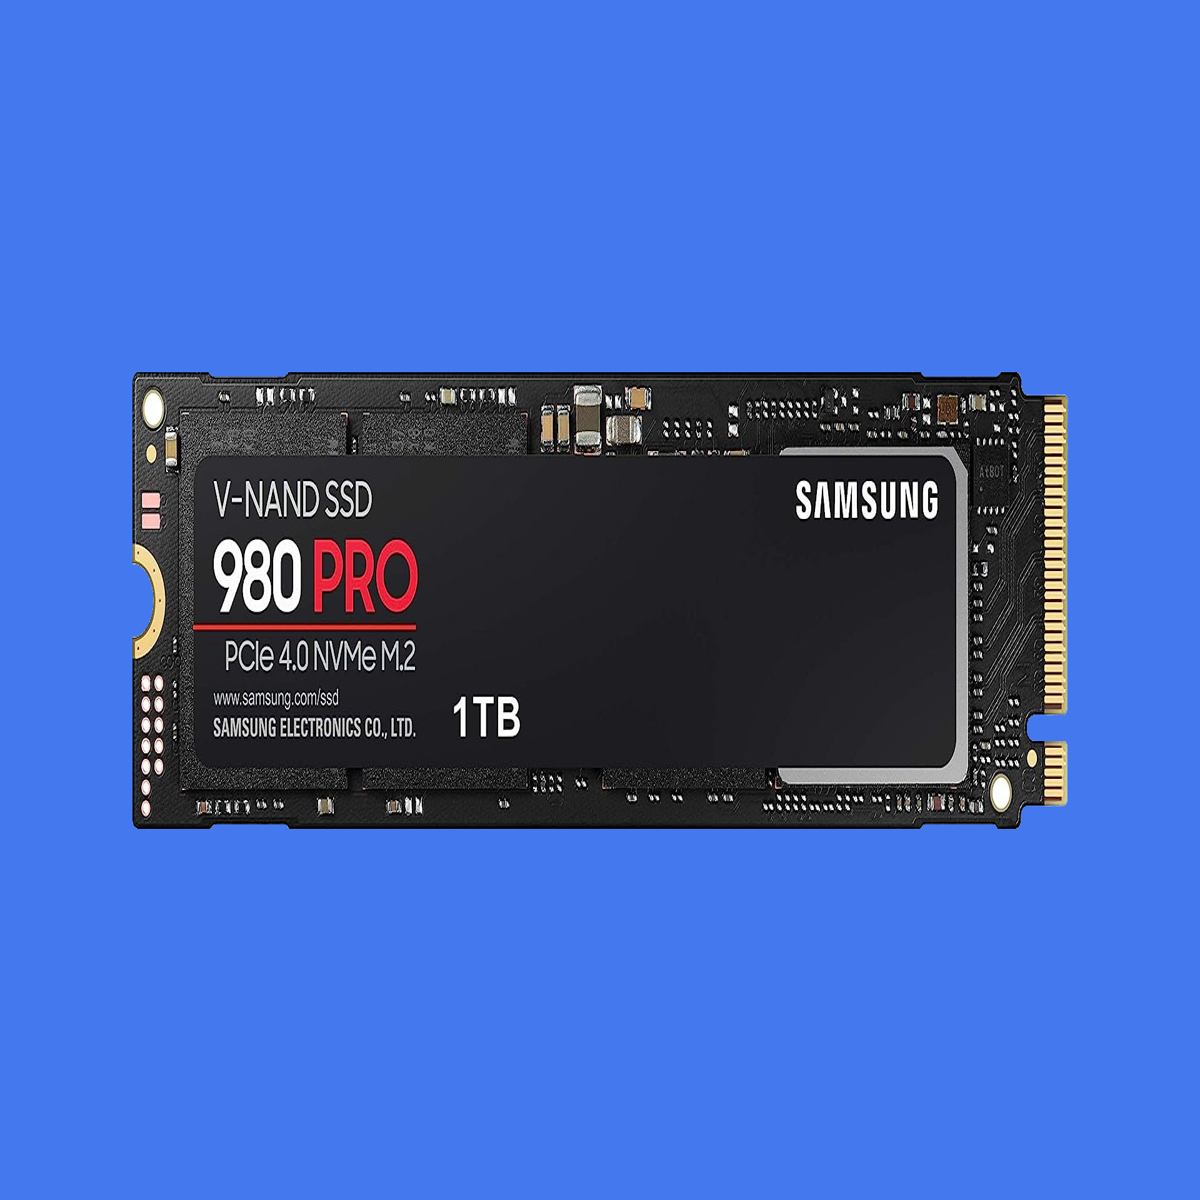 Samsung SSD 980 PRO PCle 4.0 NVMe M.2 on motherboard background Stock Photo